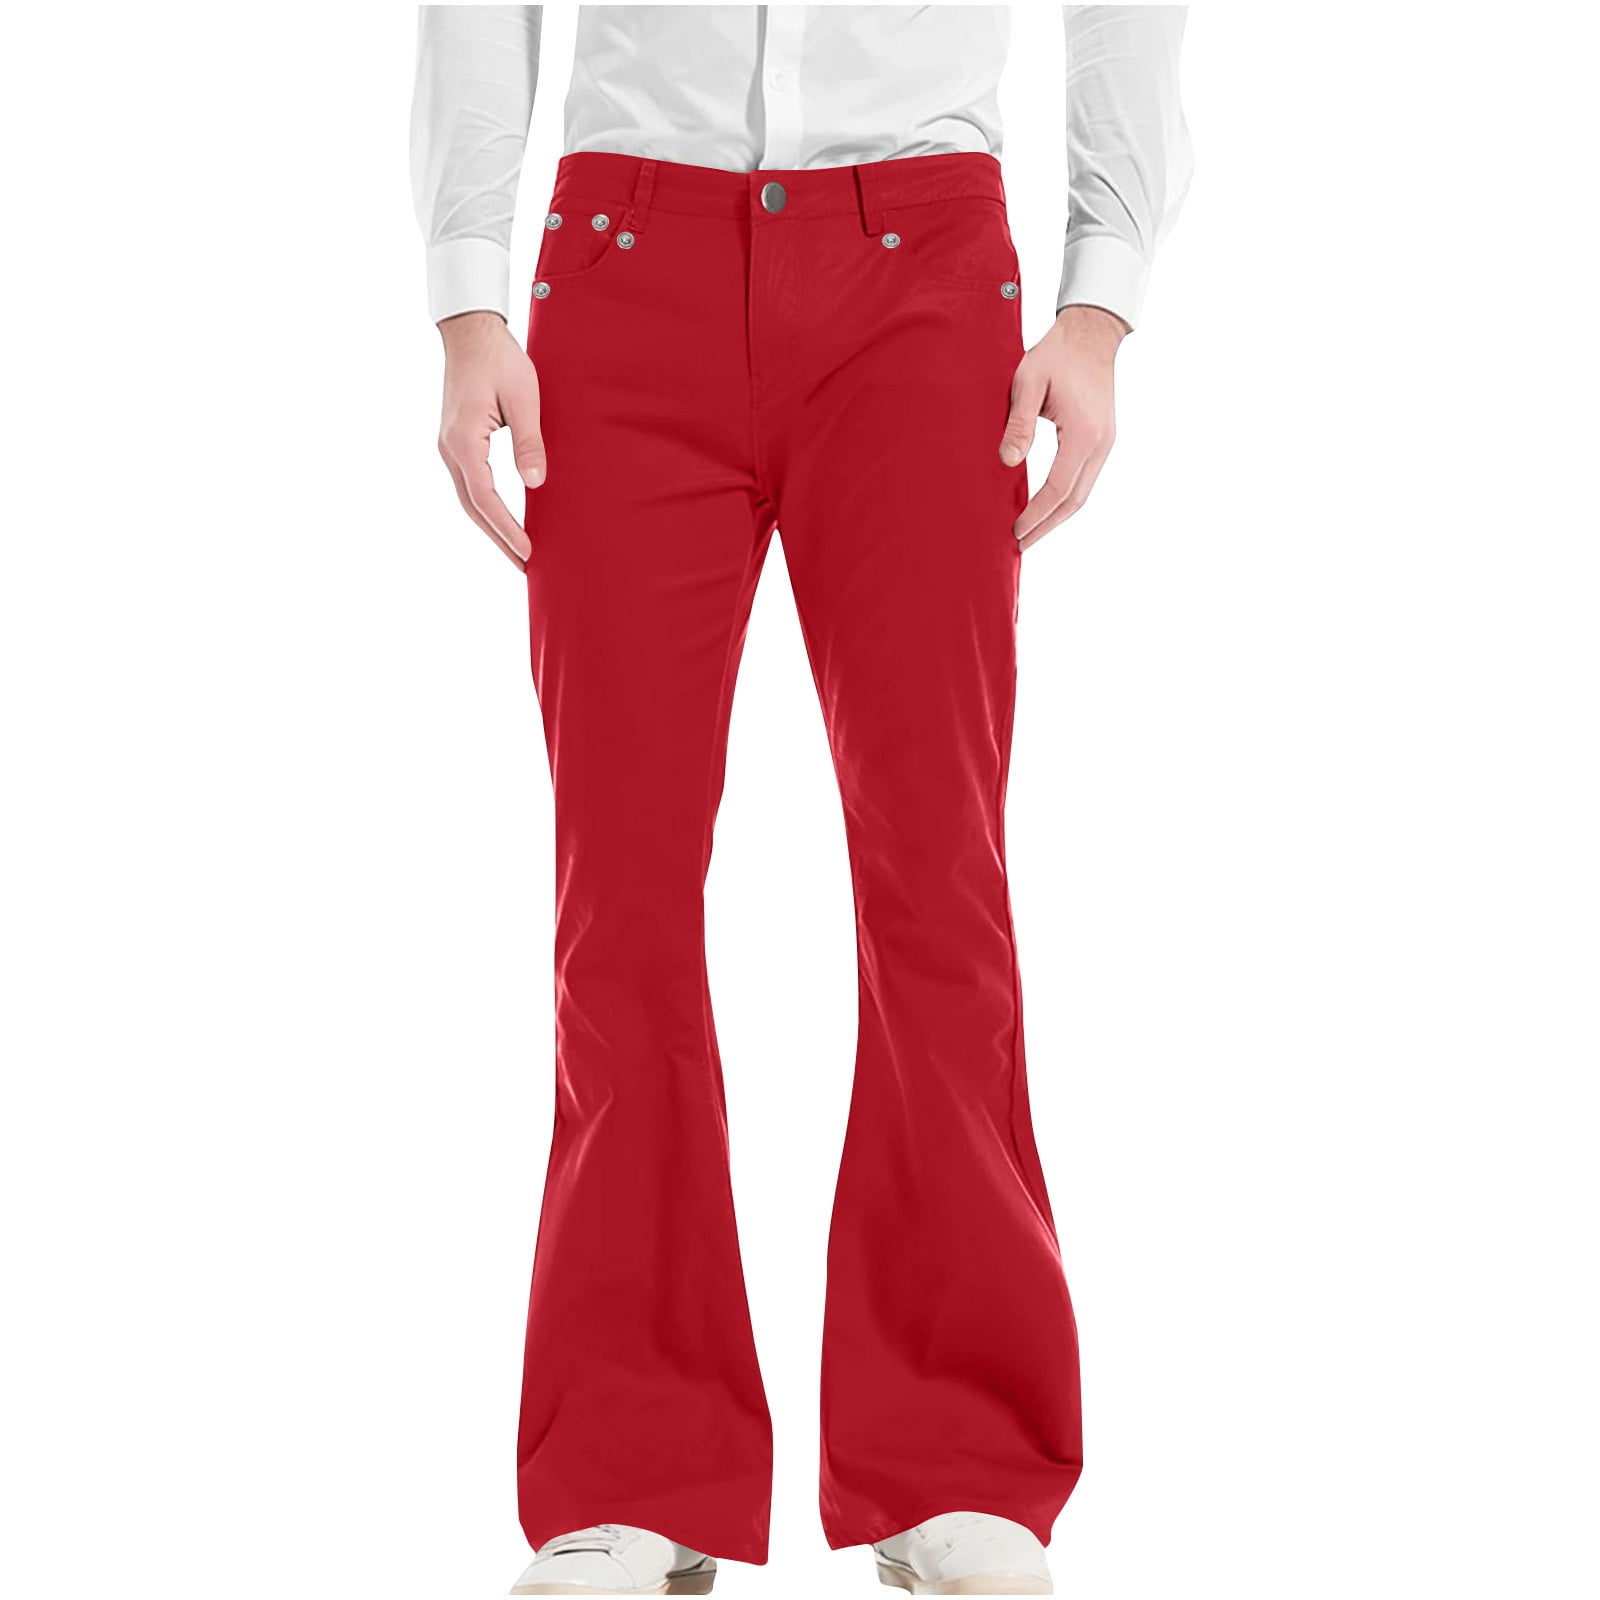 Men's Flares Trousers | Vintage Retro Flared Trousers & Jeans – Mazeys UK